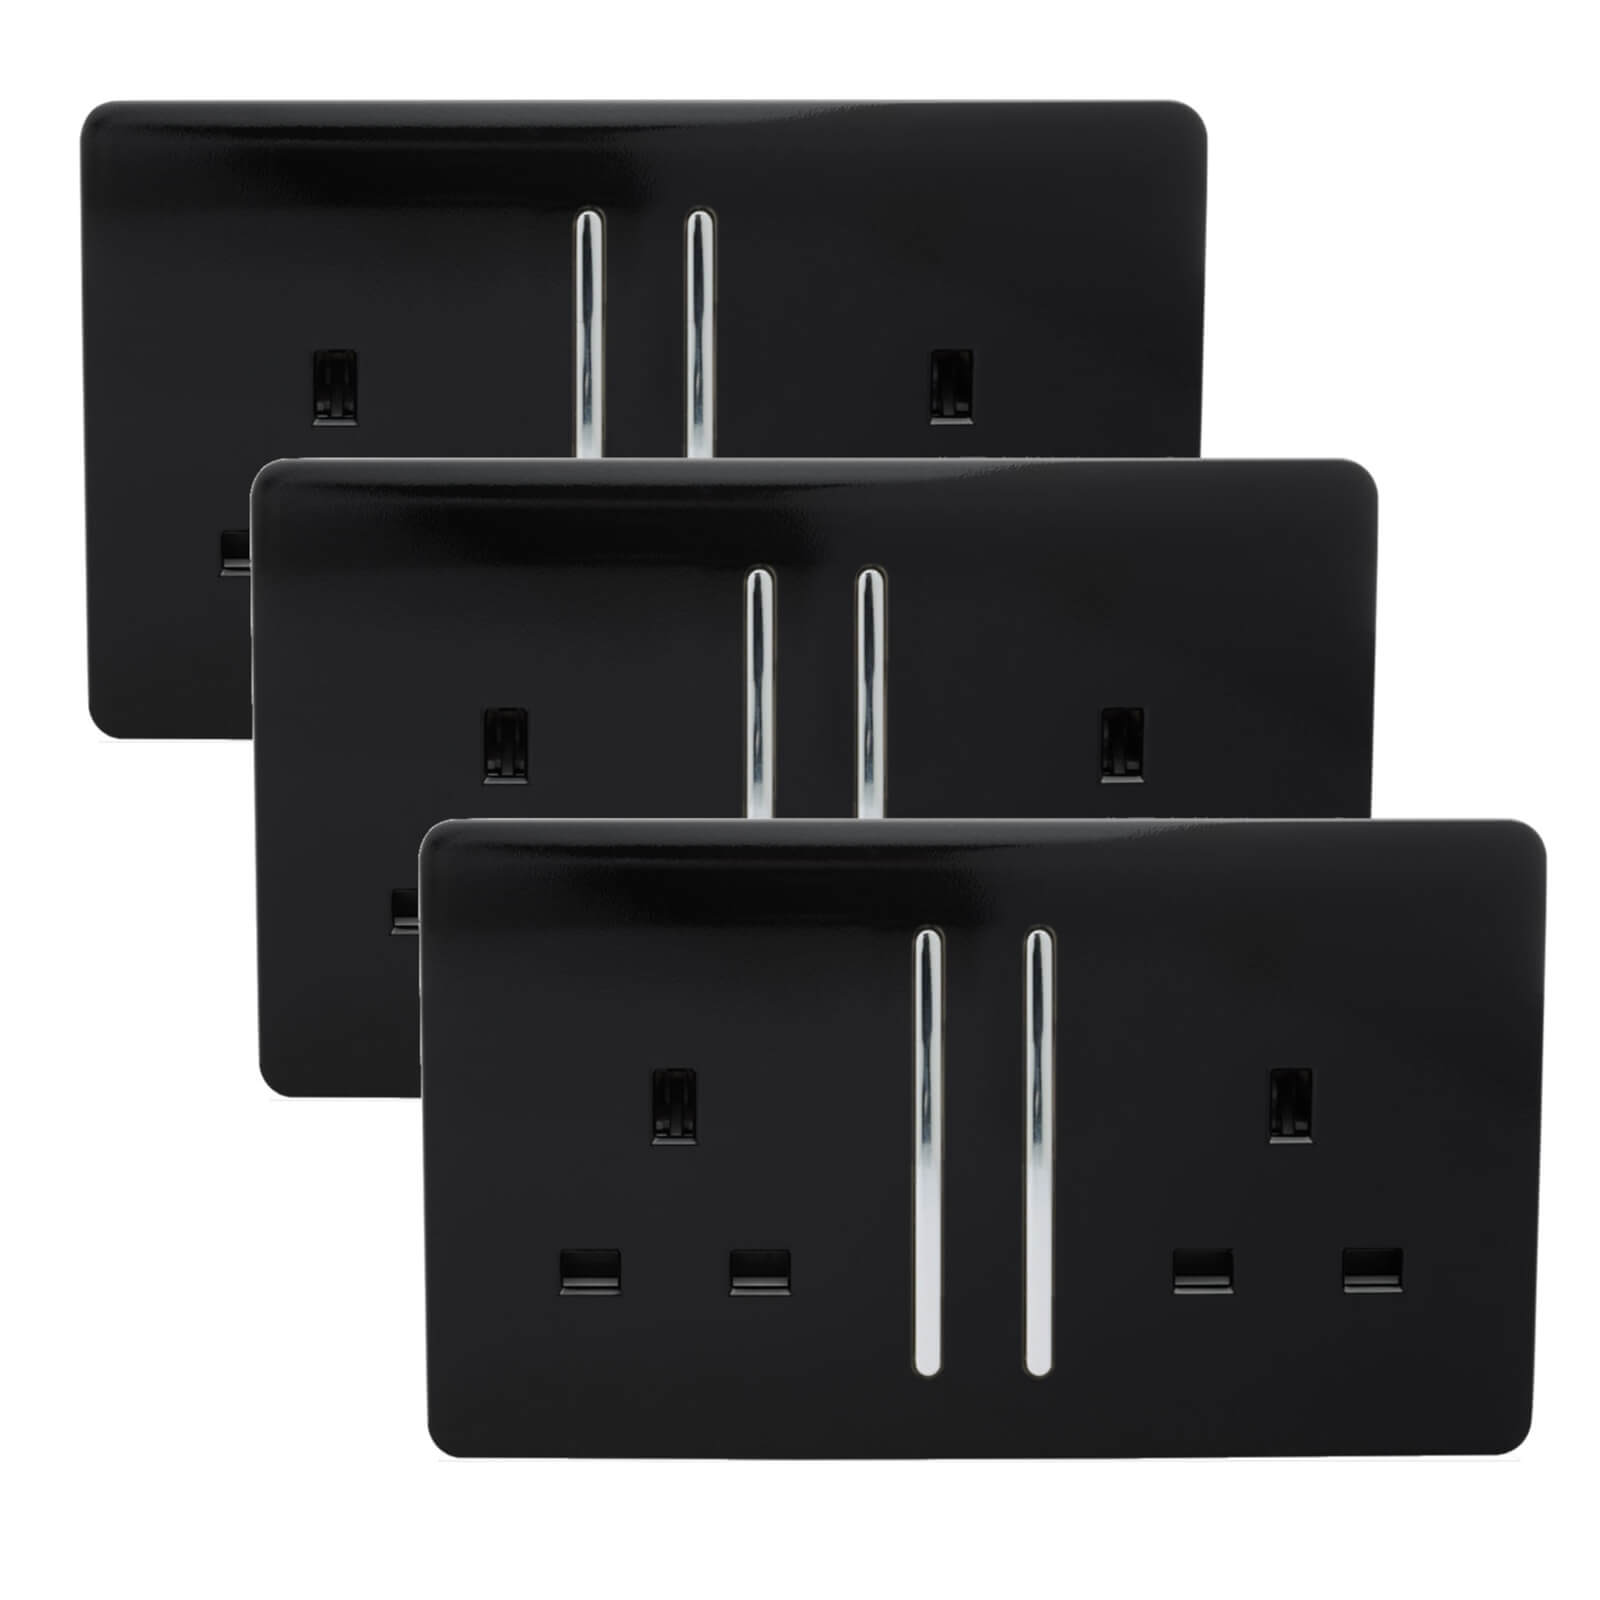 Trendi Switch 2 Gang 13 amp long switched Plug Socket in Screwless Black (3 Pack)